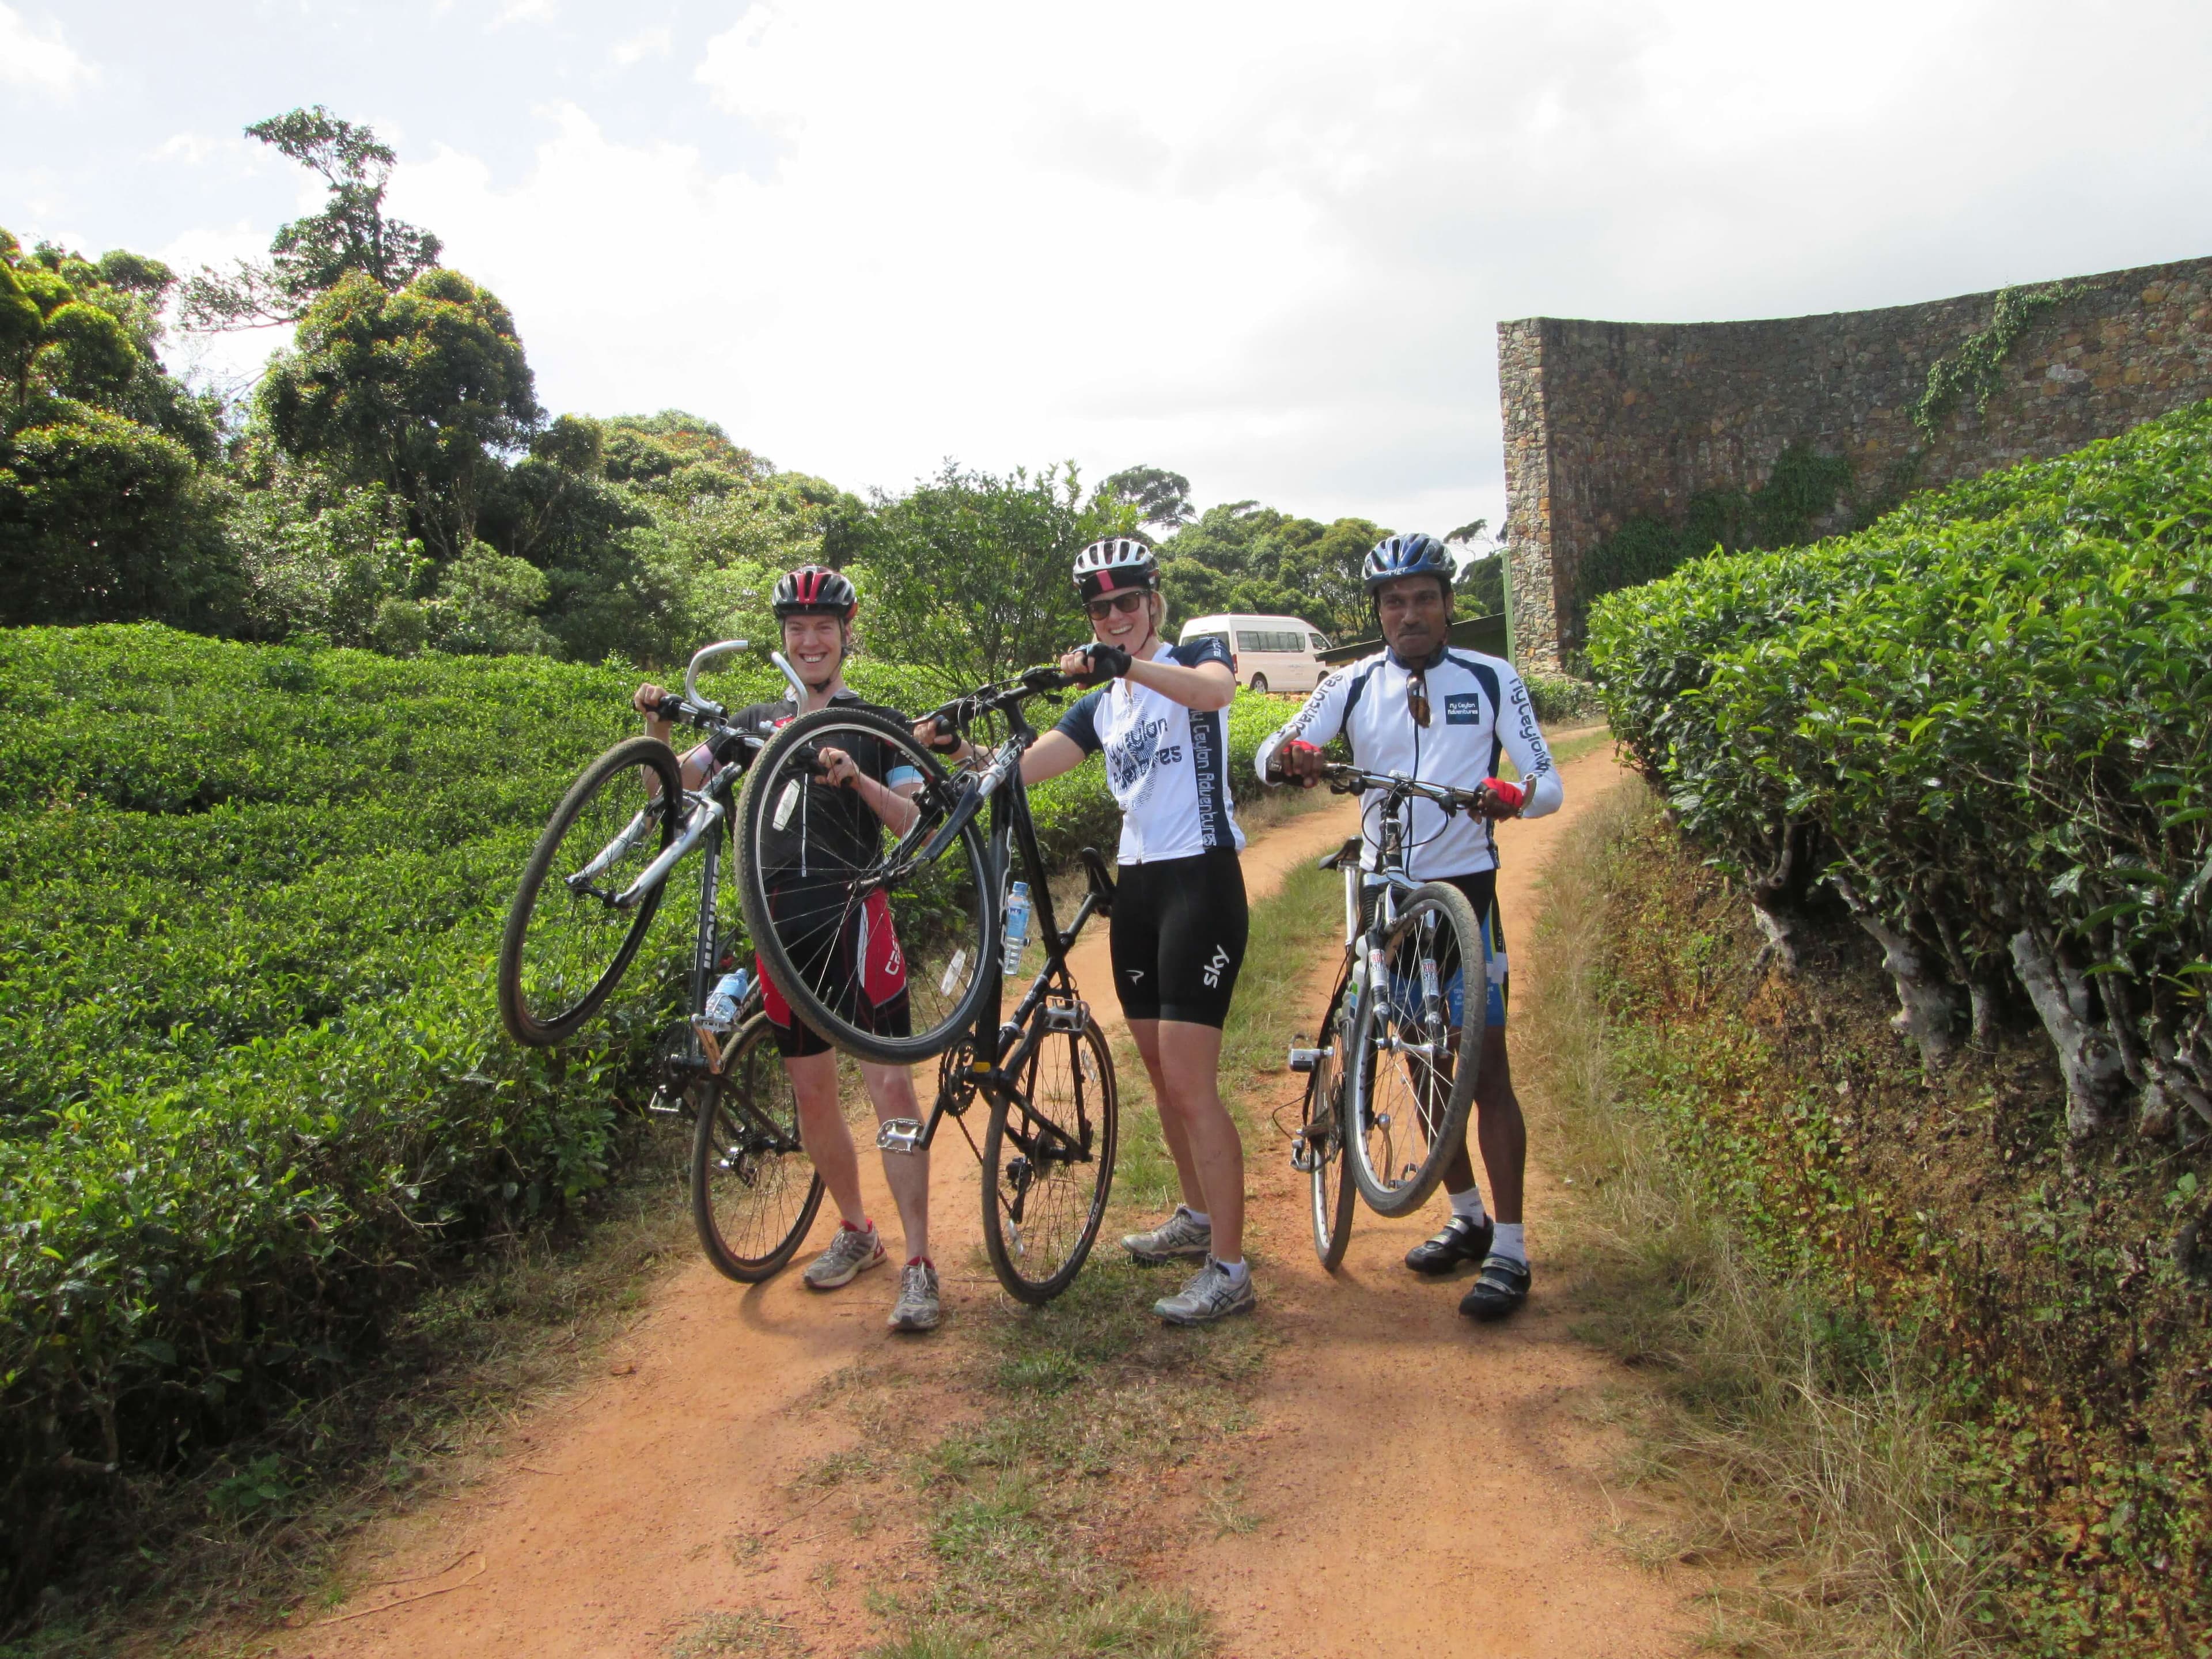 The cyclists cycling through tea state in Kandy Sri Lanka